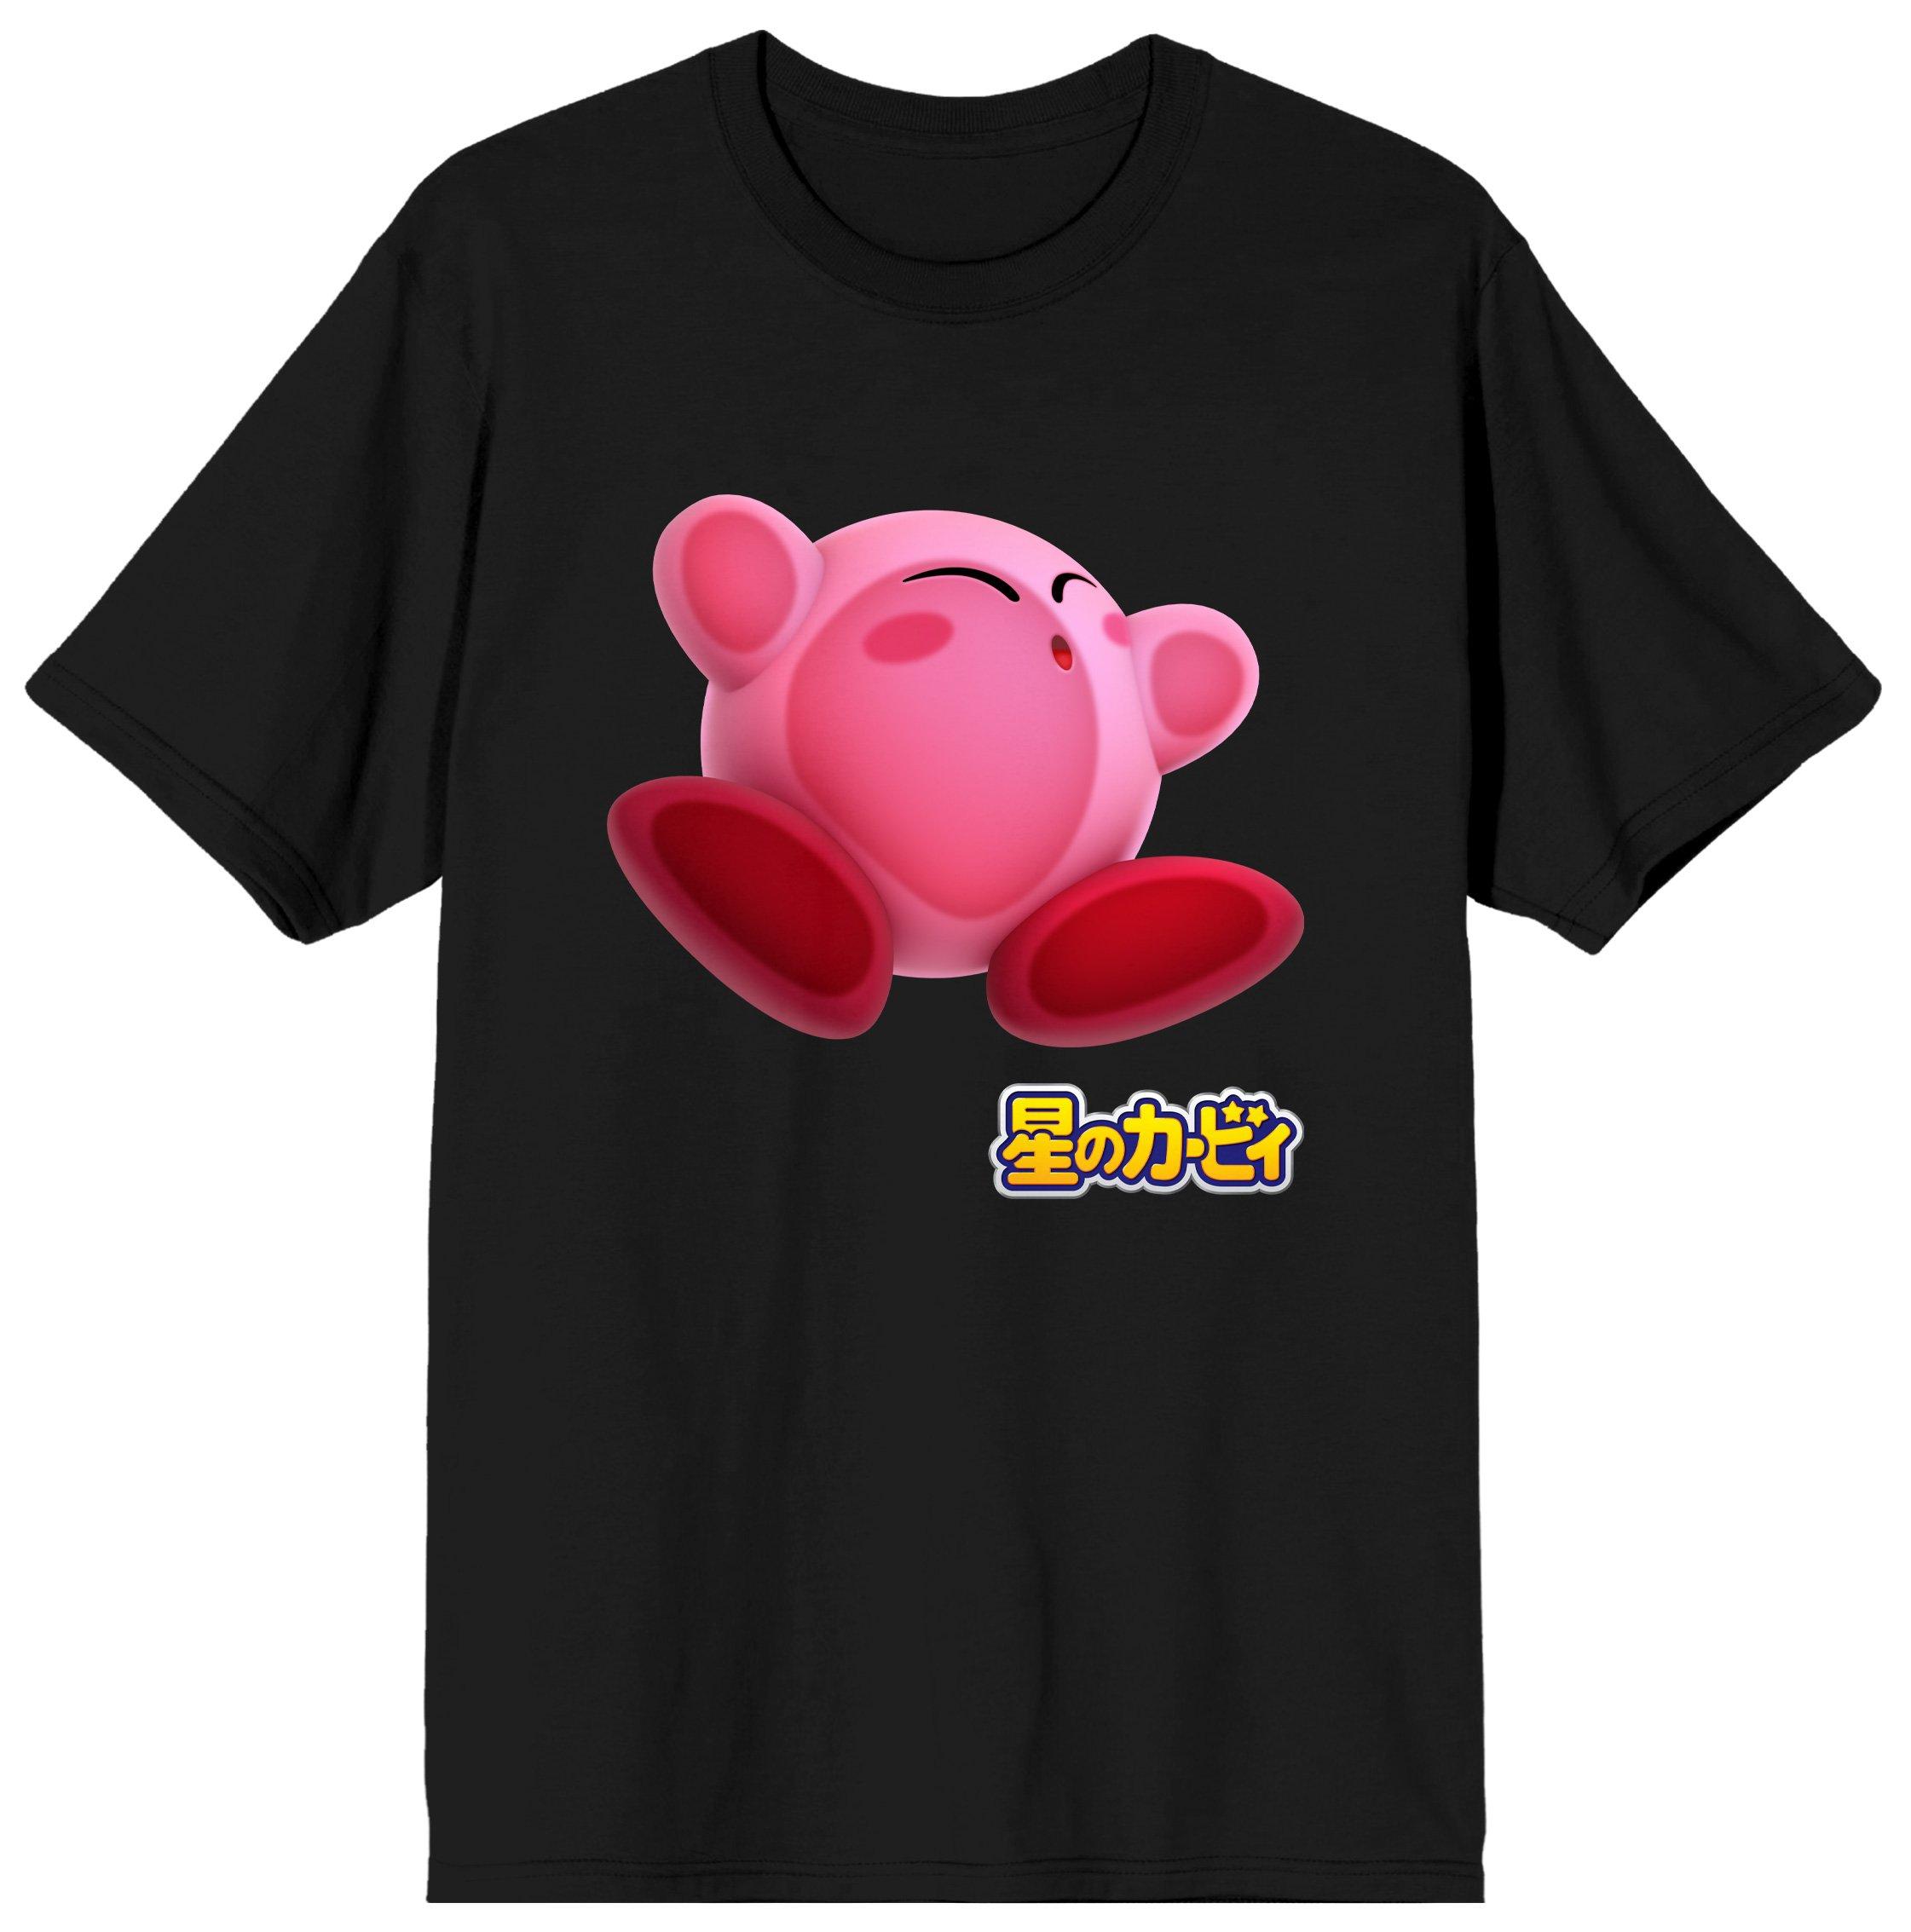 Kirby Pink Mochi and Invisible Wall Men's Black Short Sleeve Graphic T-Shirt